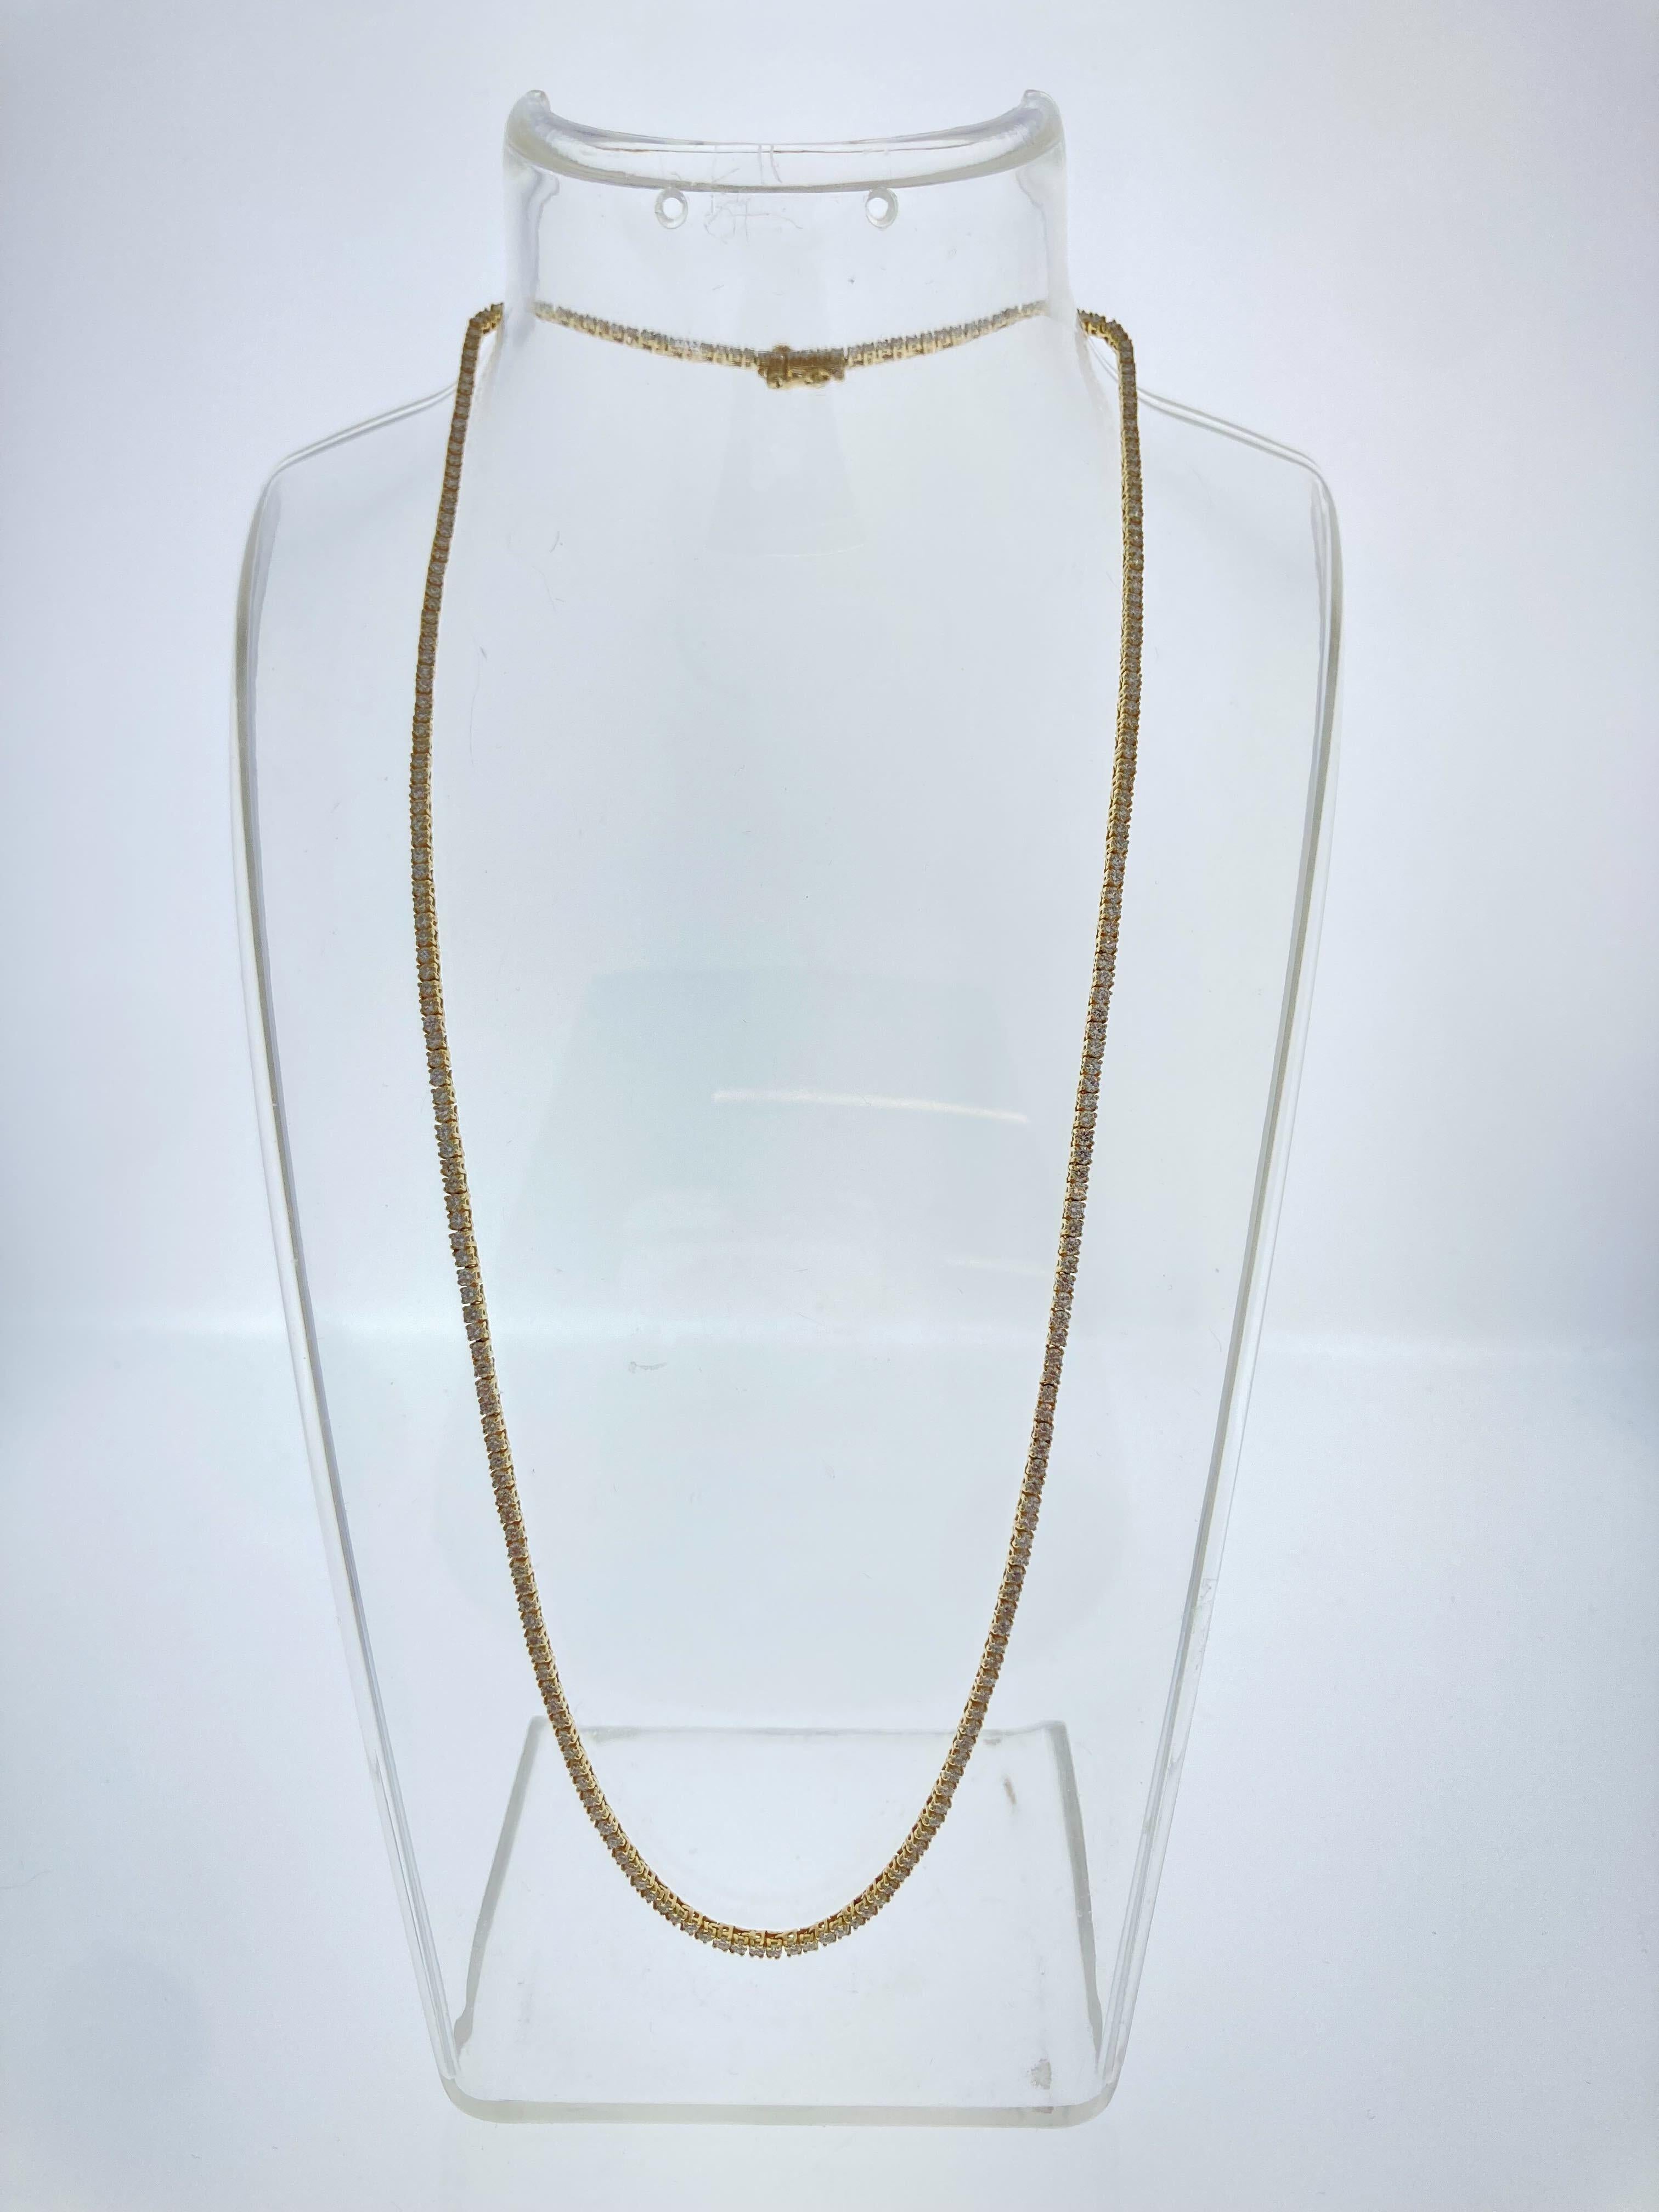 Round Cut 5.00 Carat Round Diamond Tennis Necklaces In 14k Yellow Gold For Sale